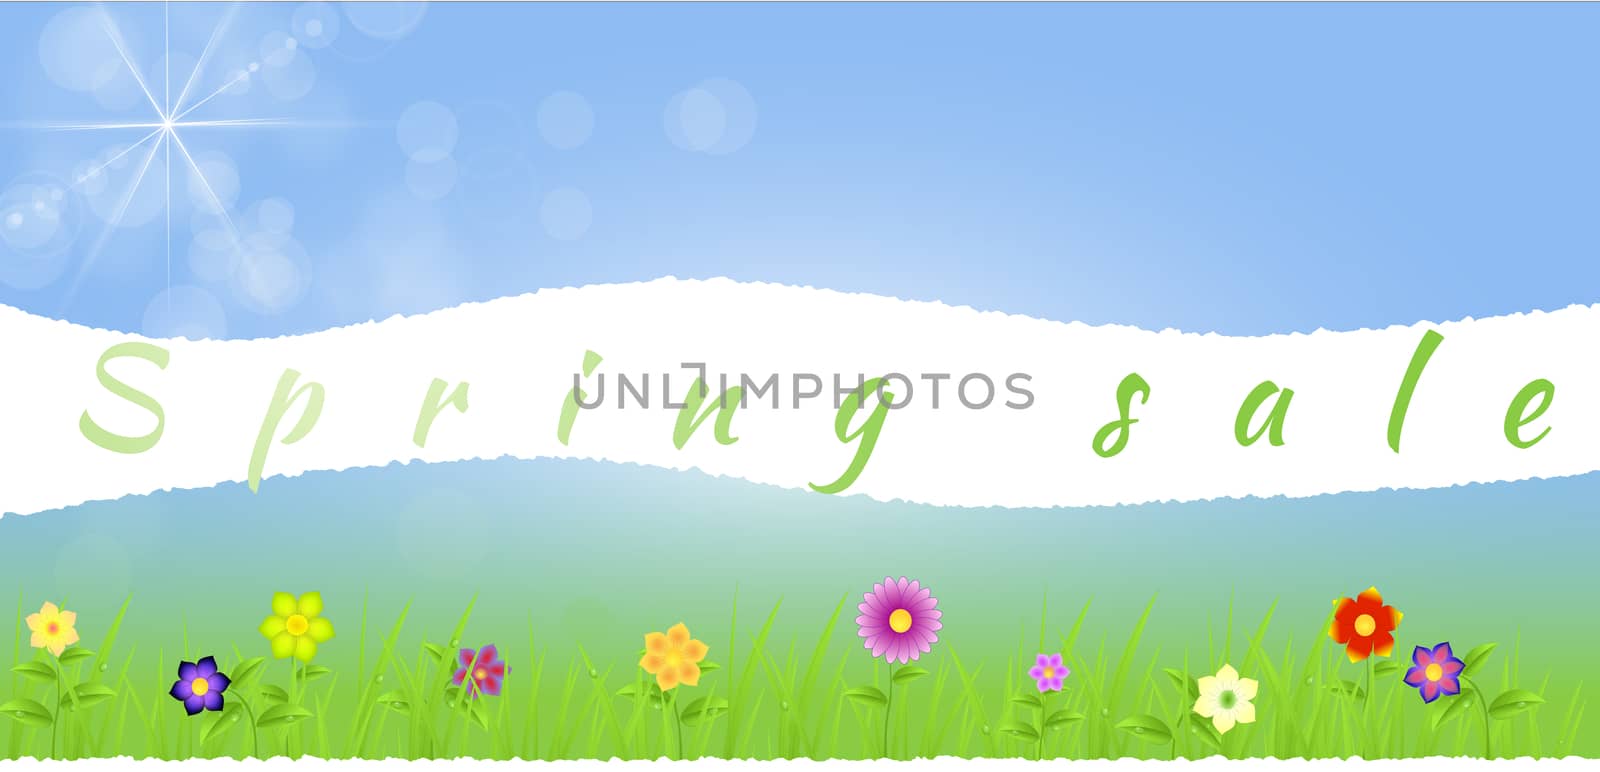 Torn paper middle spring landscape with flowers,grass,raindrops on a blue sunny background with ray of lights